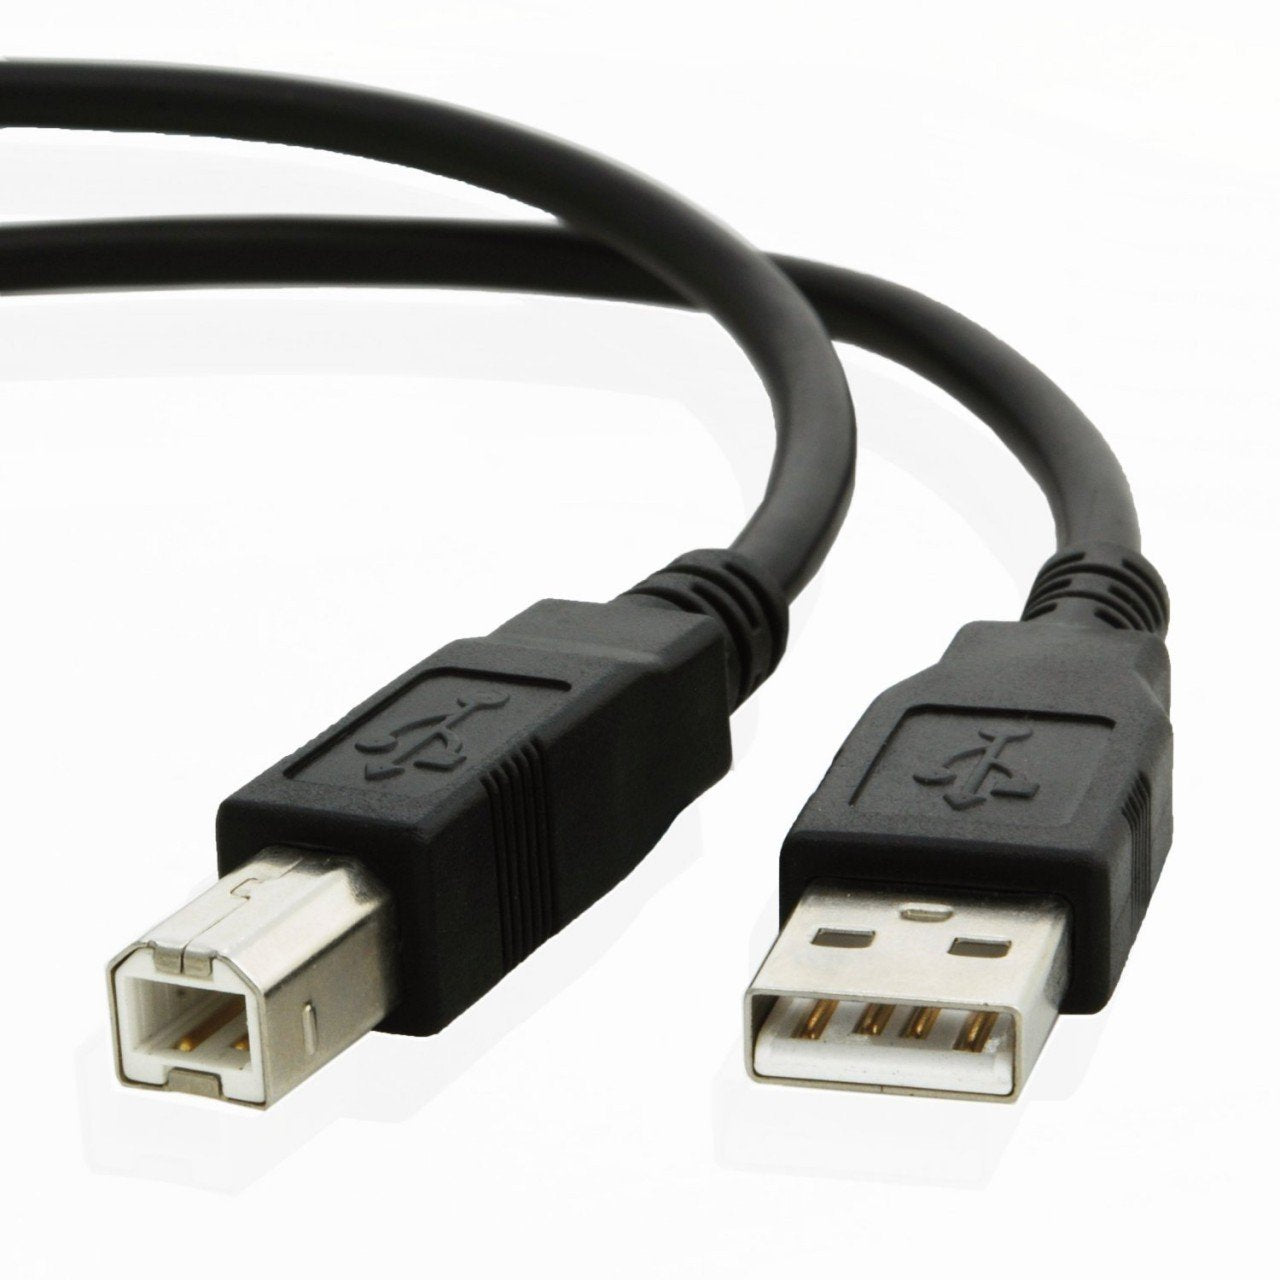 USB cable for Epson PERFECTION V800